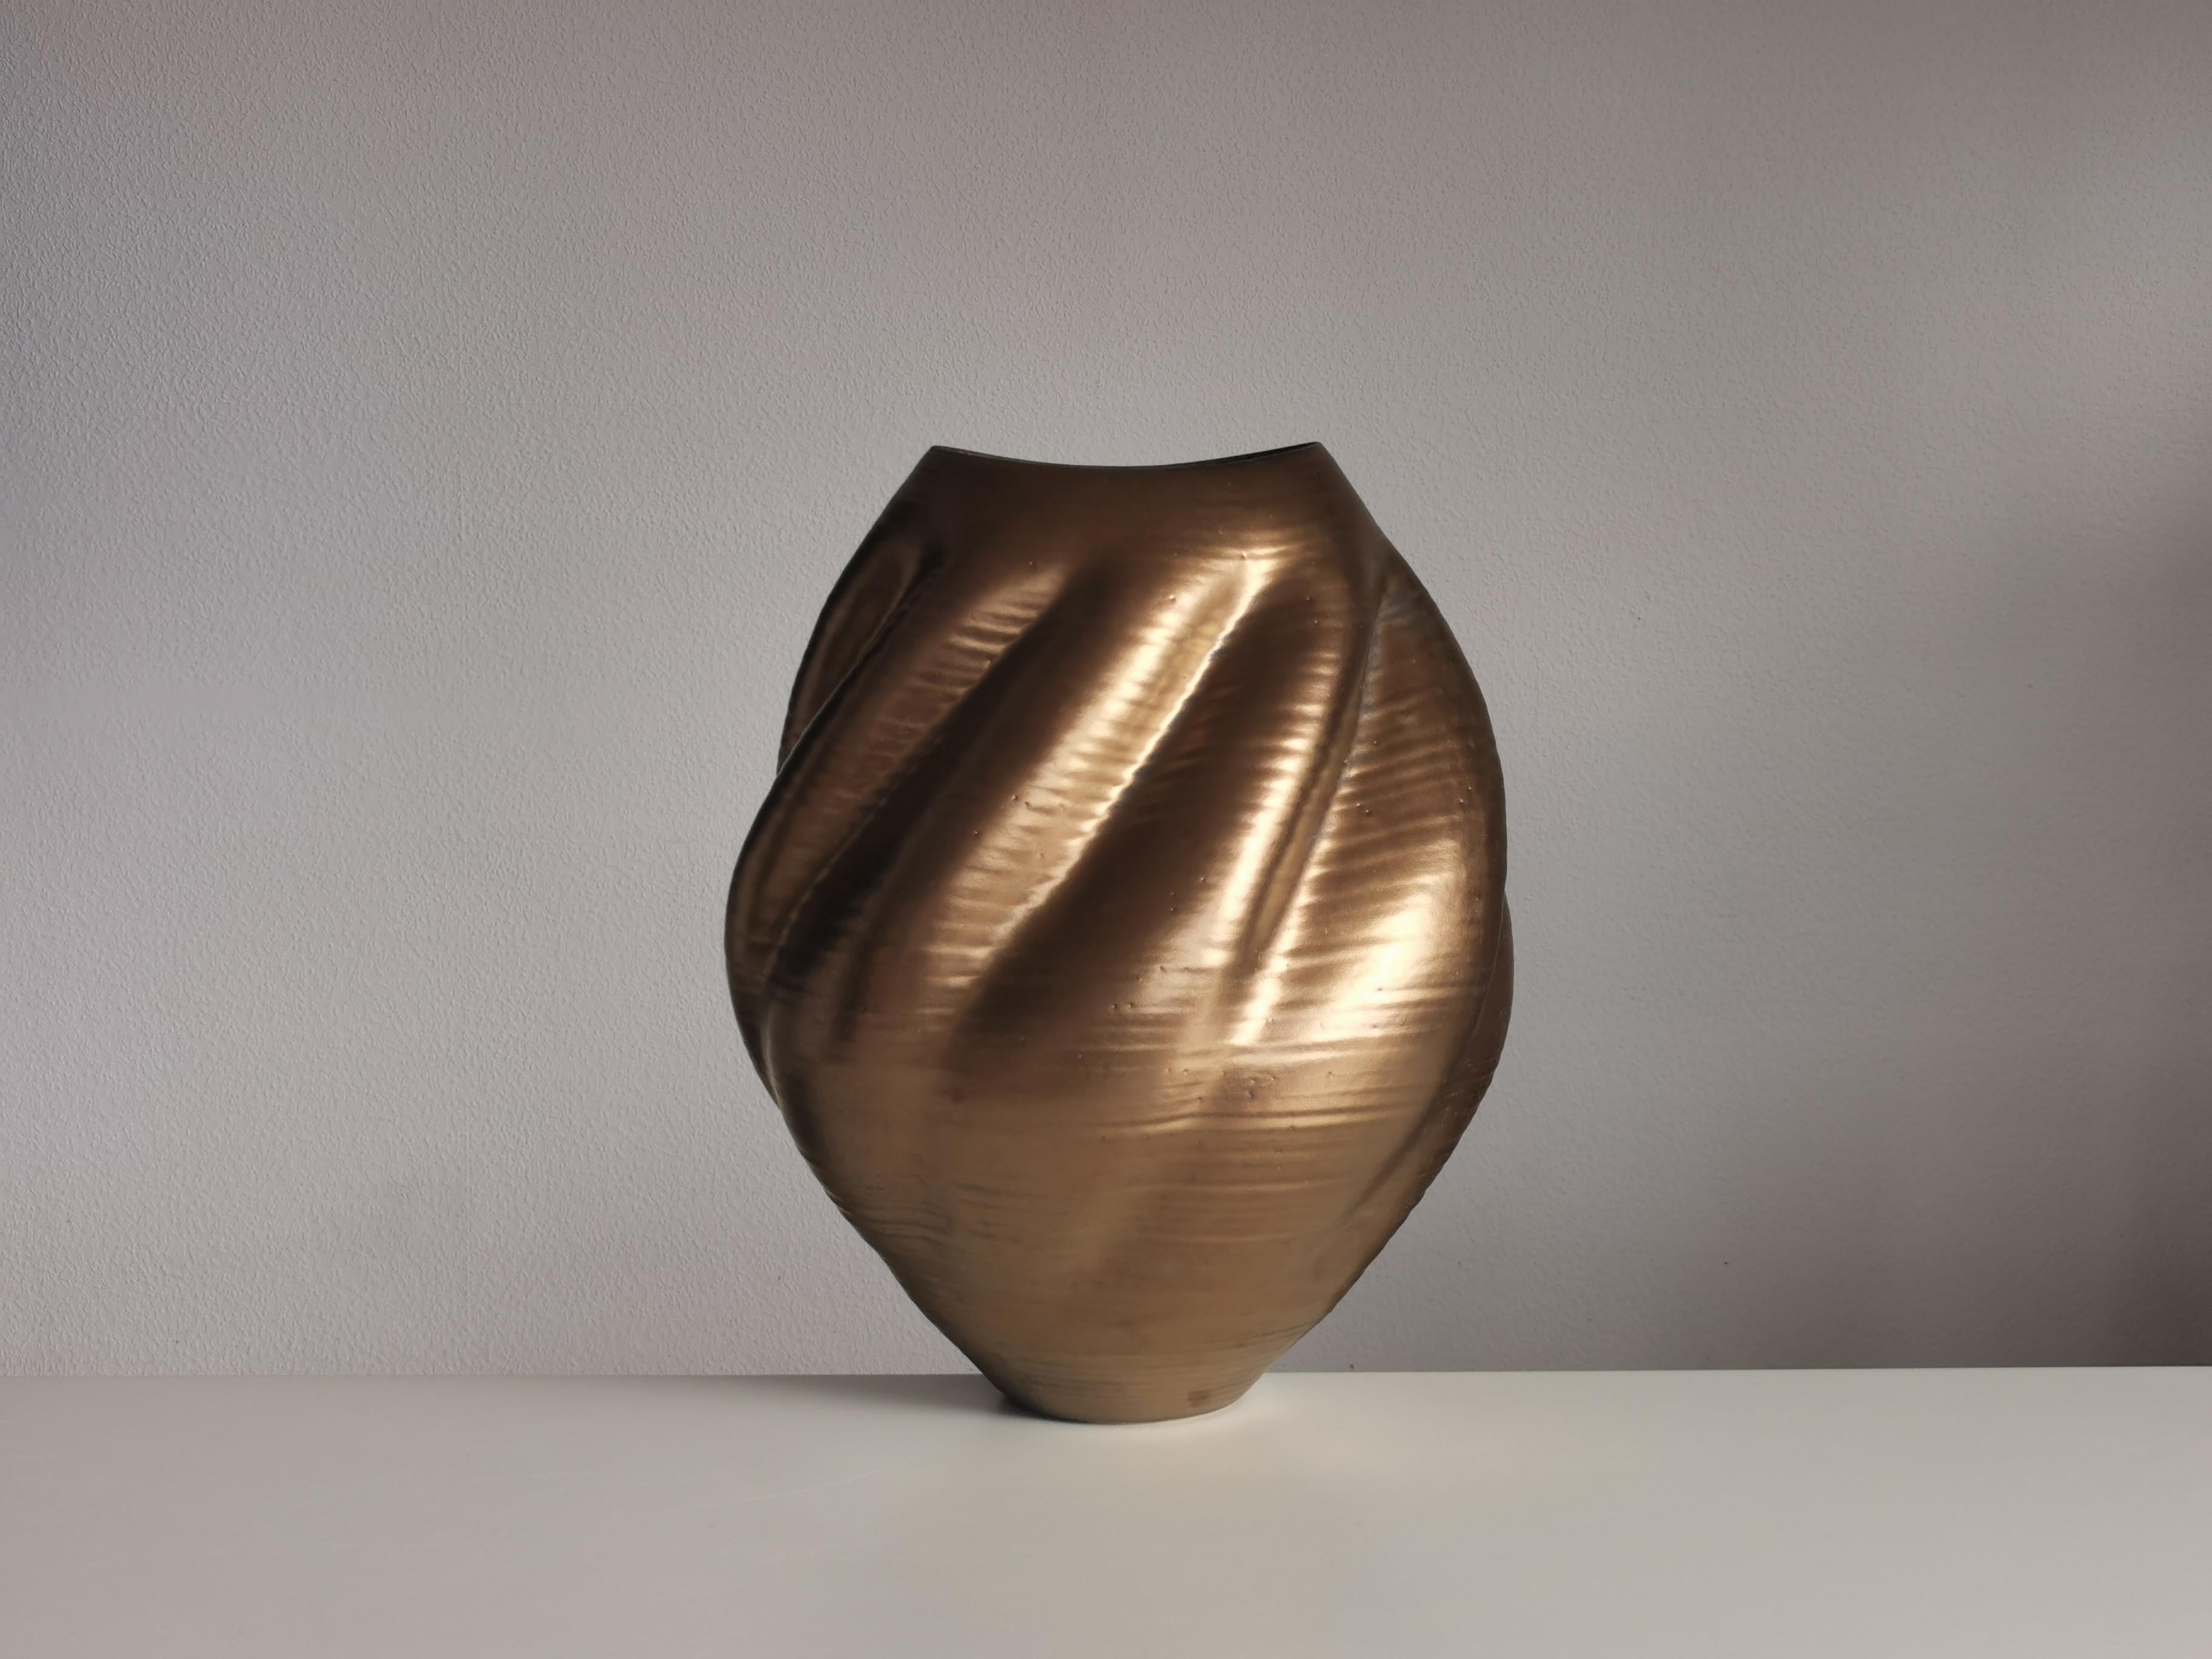 New sumptuous ceramic vessel from ceramic artist Nicholas Arroyave-Portela. Made in 2022.

Materials: White St.Thomas clay, Stoneware glazes, multi fired to cone 6 (1225 degrees)

Measures: 48 cm tall, 35 cm wide, 35 cm deep
Weight: 5.7 Kg

(Vessel,